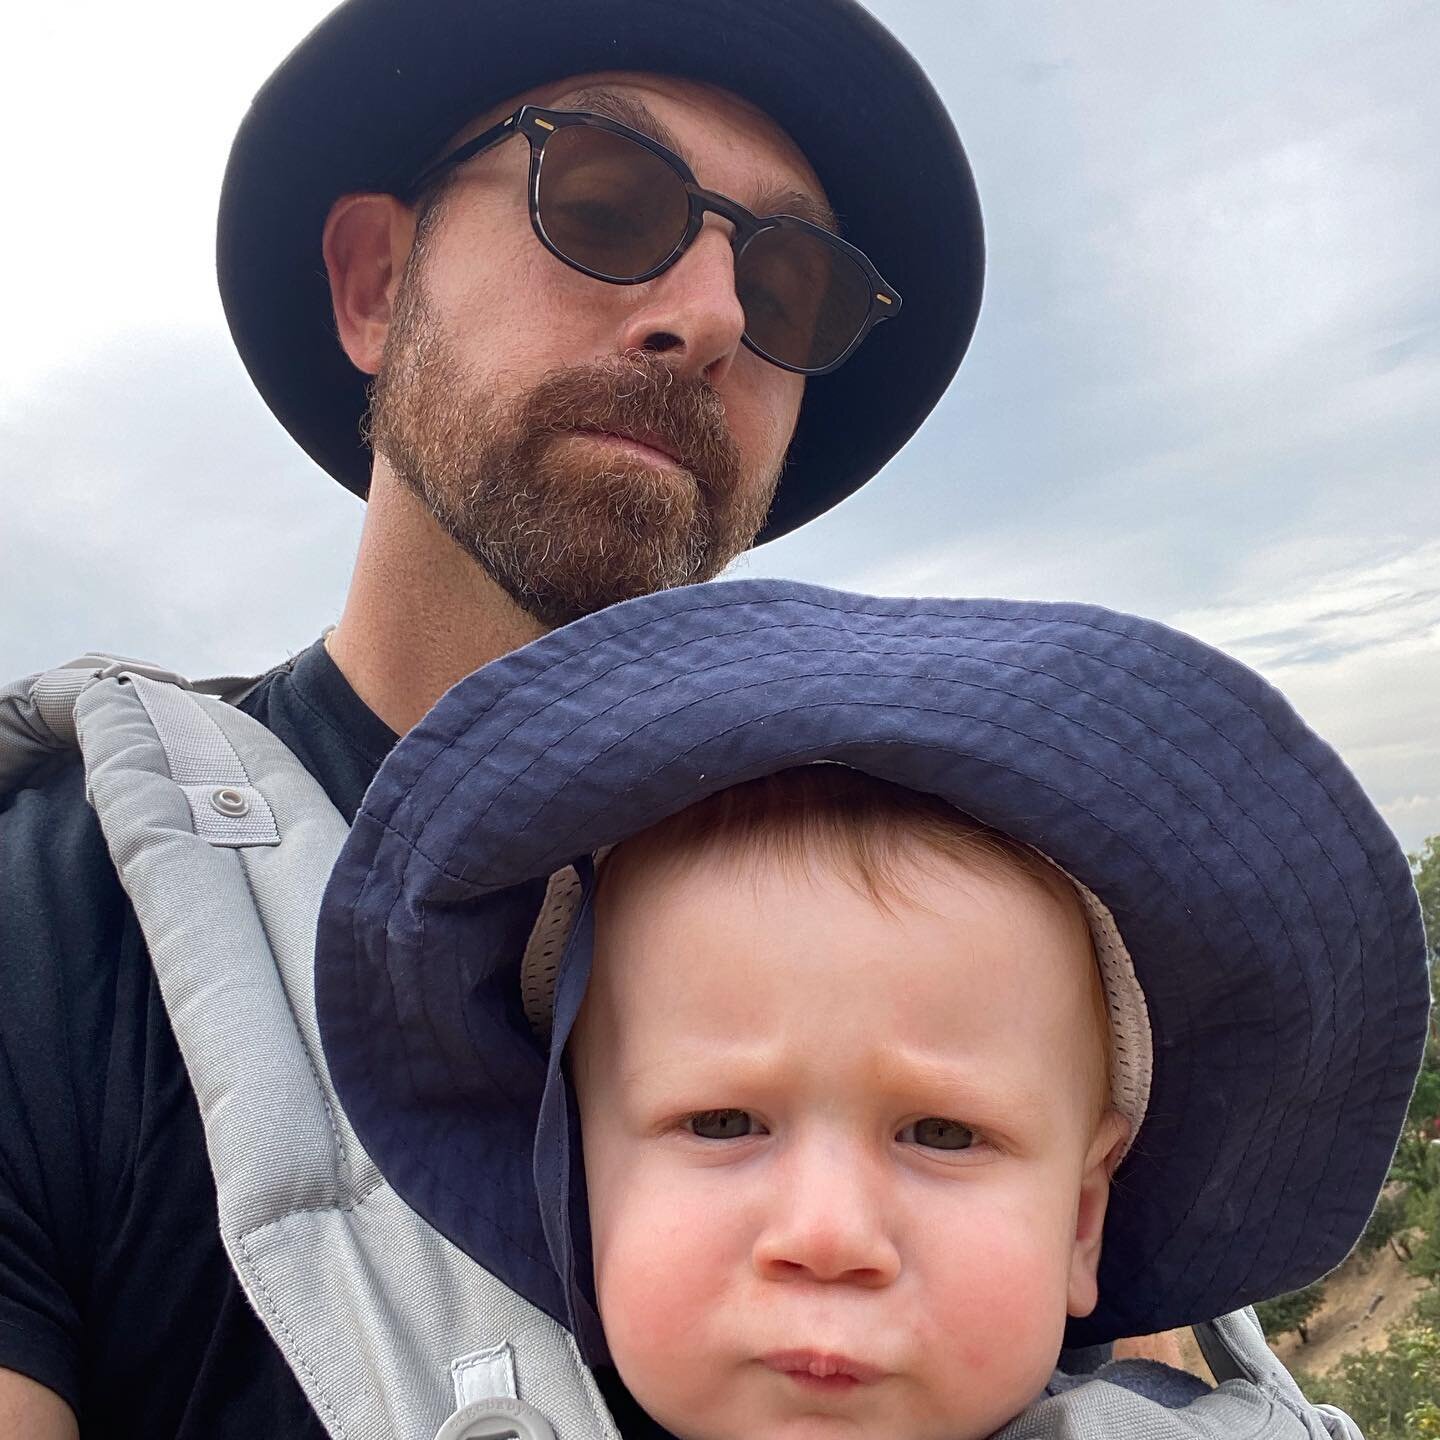 Love my morning hikes with the little guy. What are some of your favorite spots? Let me know!